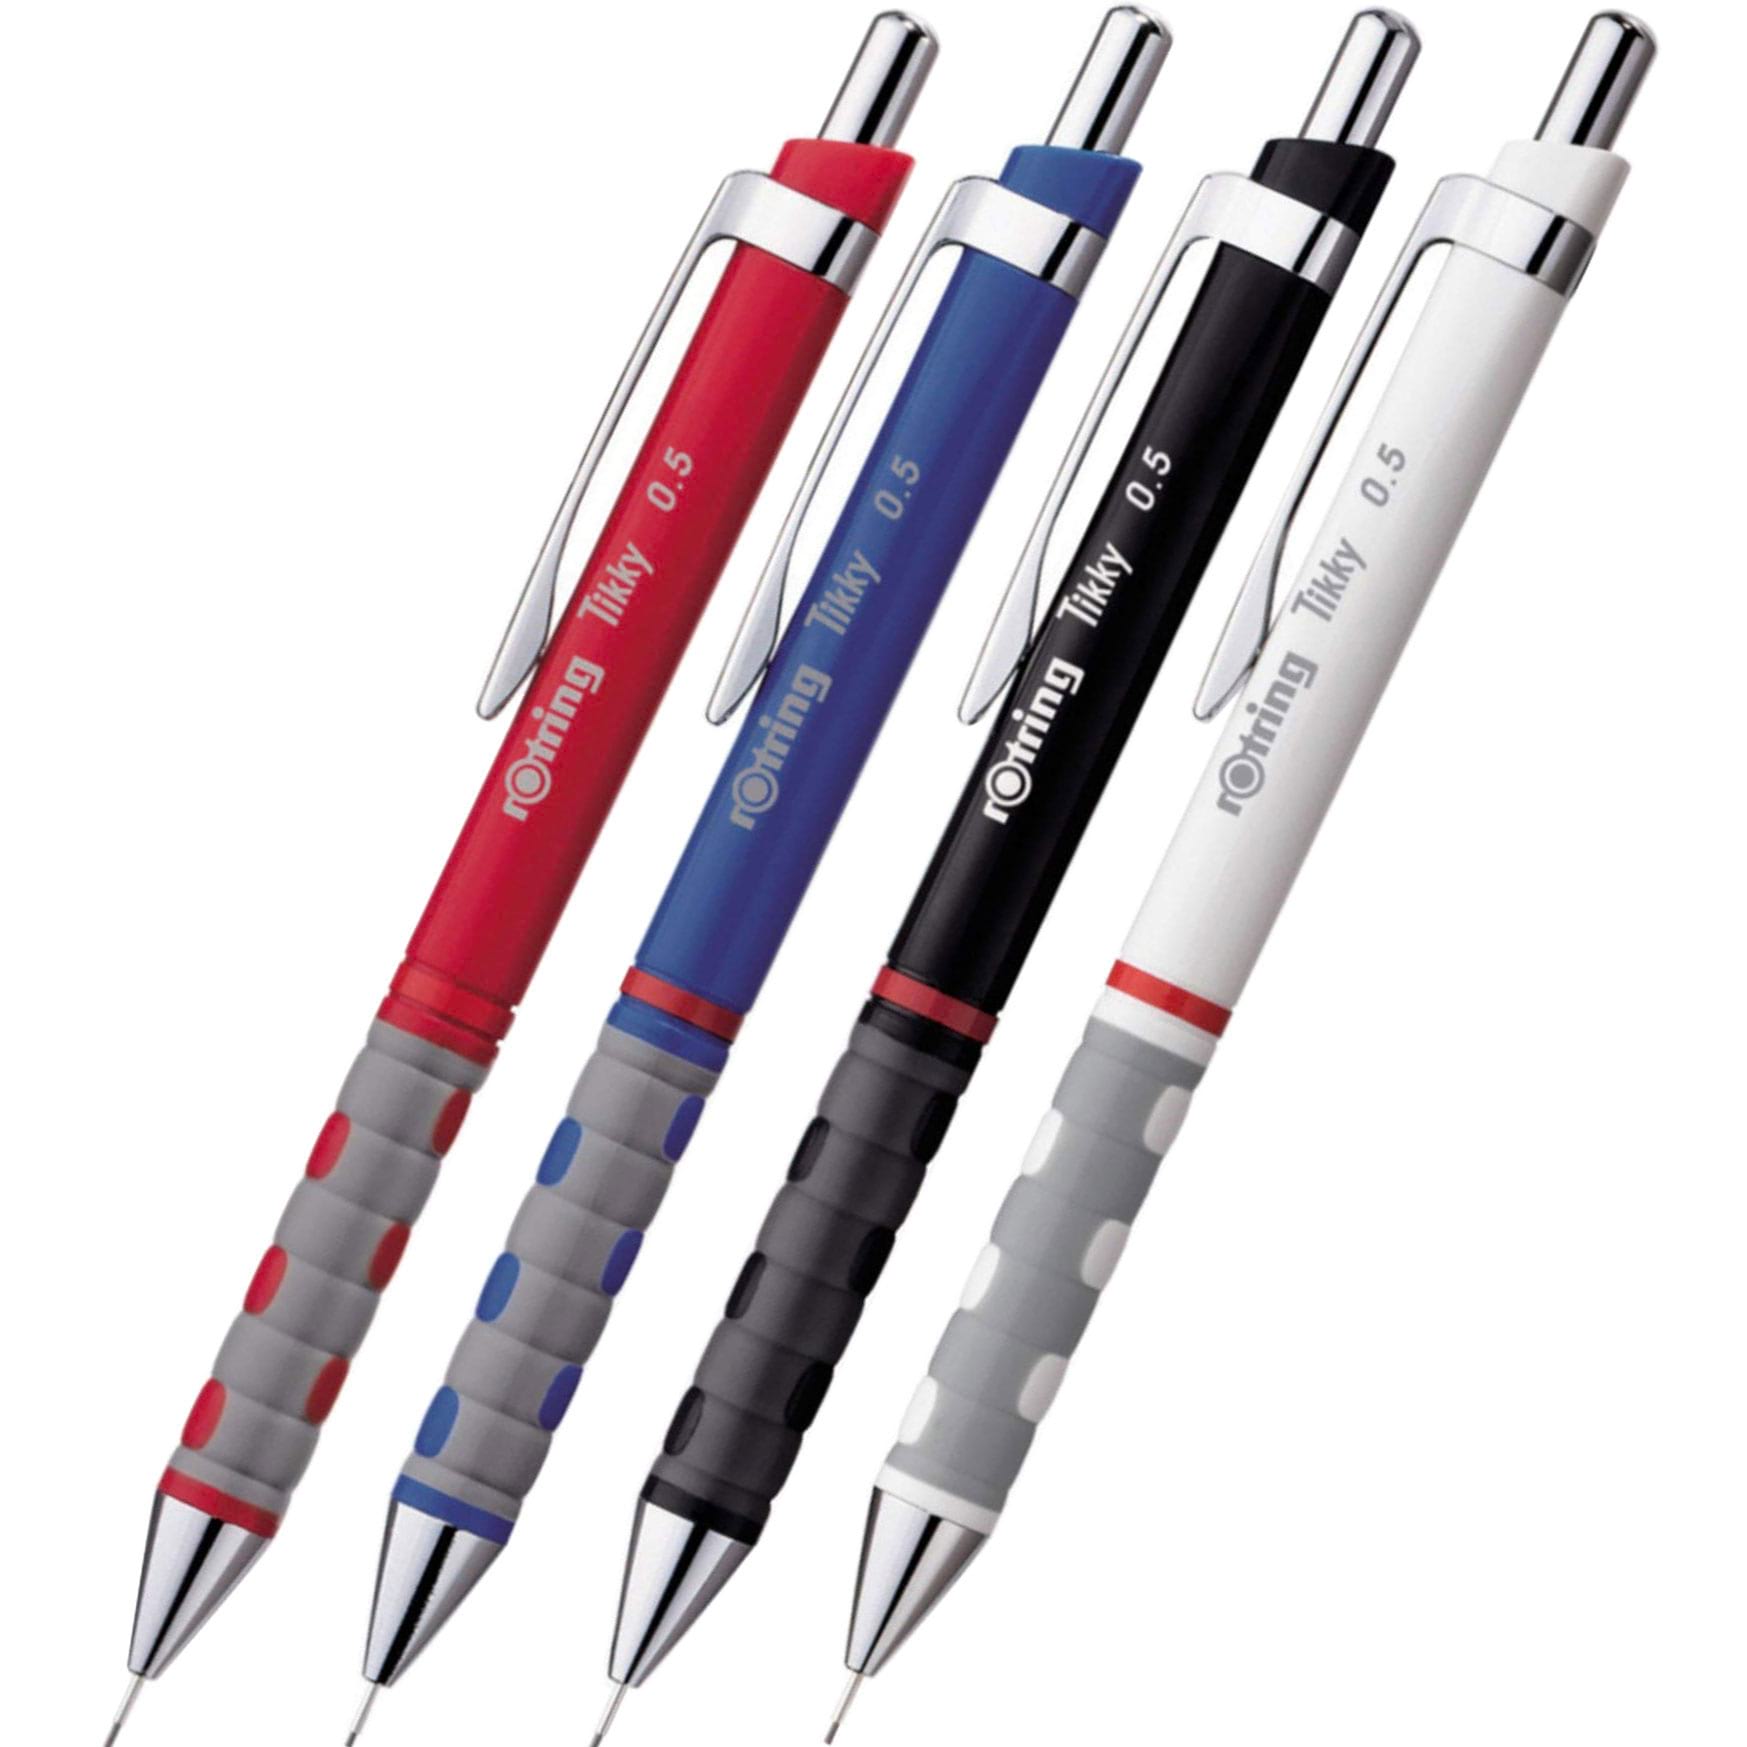 Rotring 600 Mechanical Pencil 0.5 Mm 0.7 Mm Professional Design